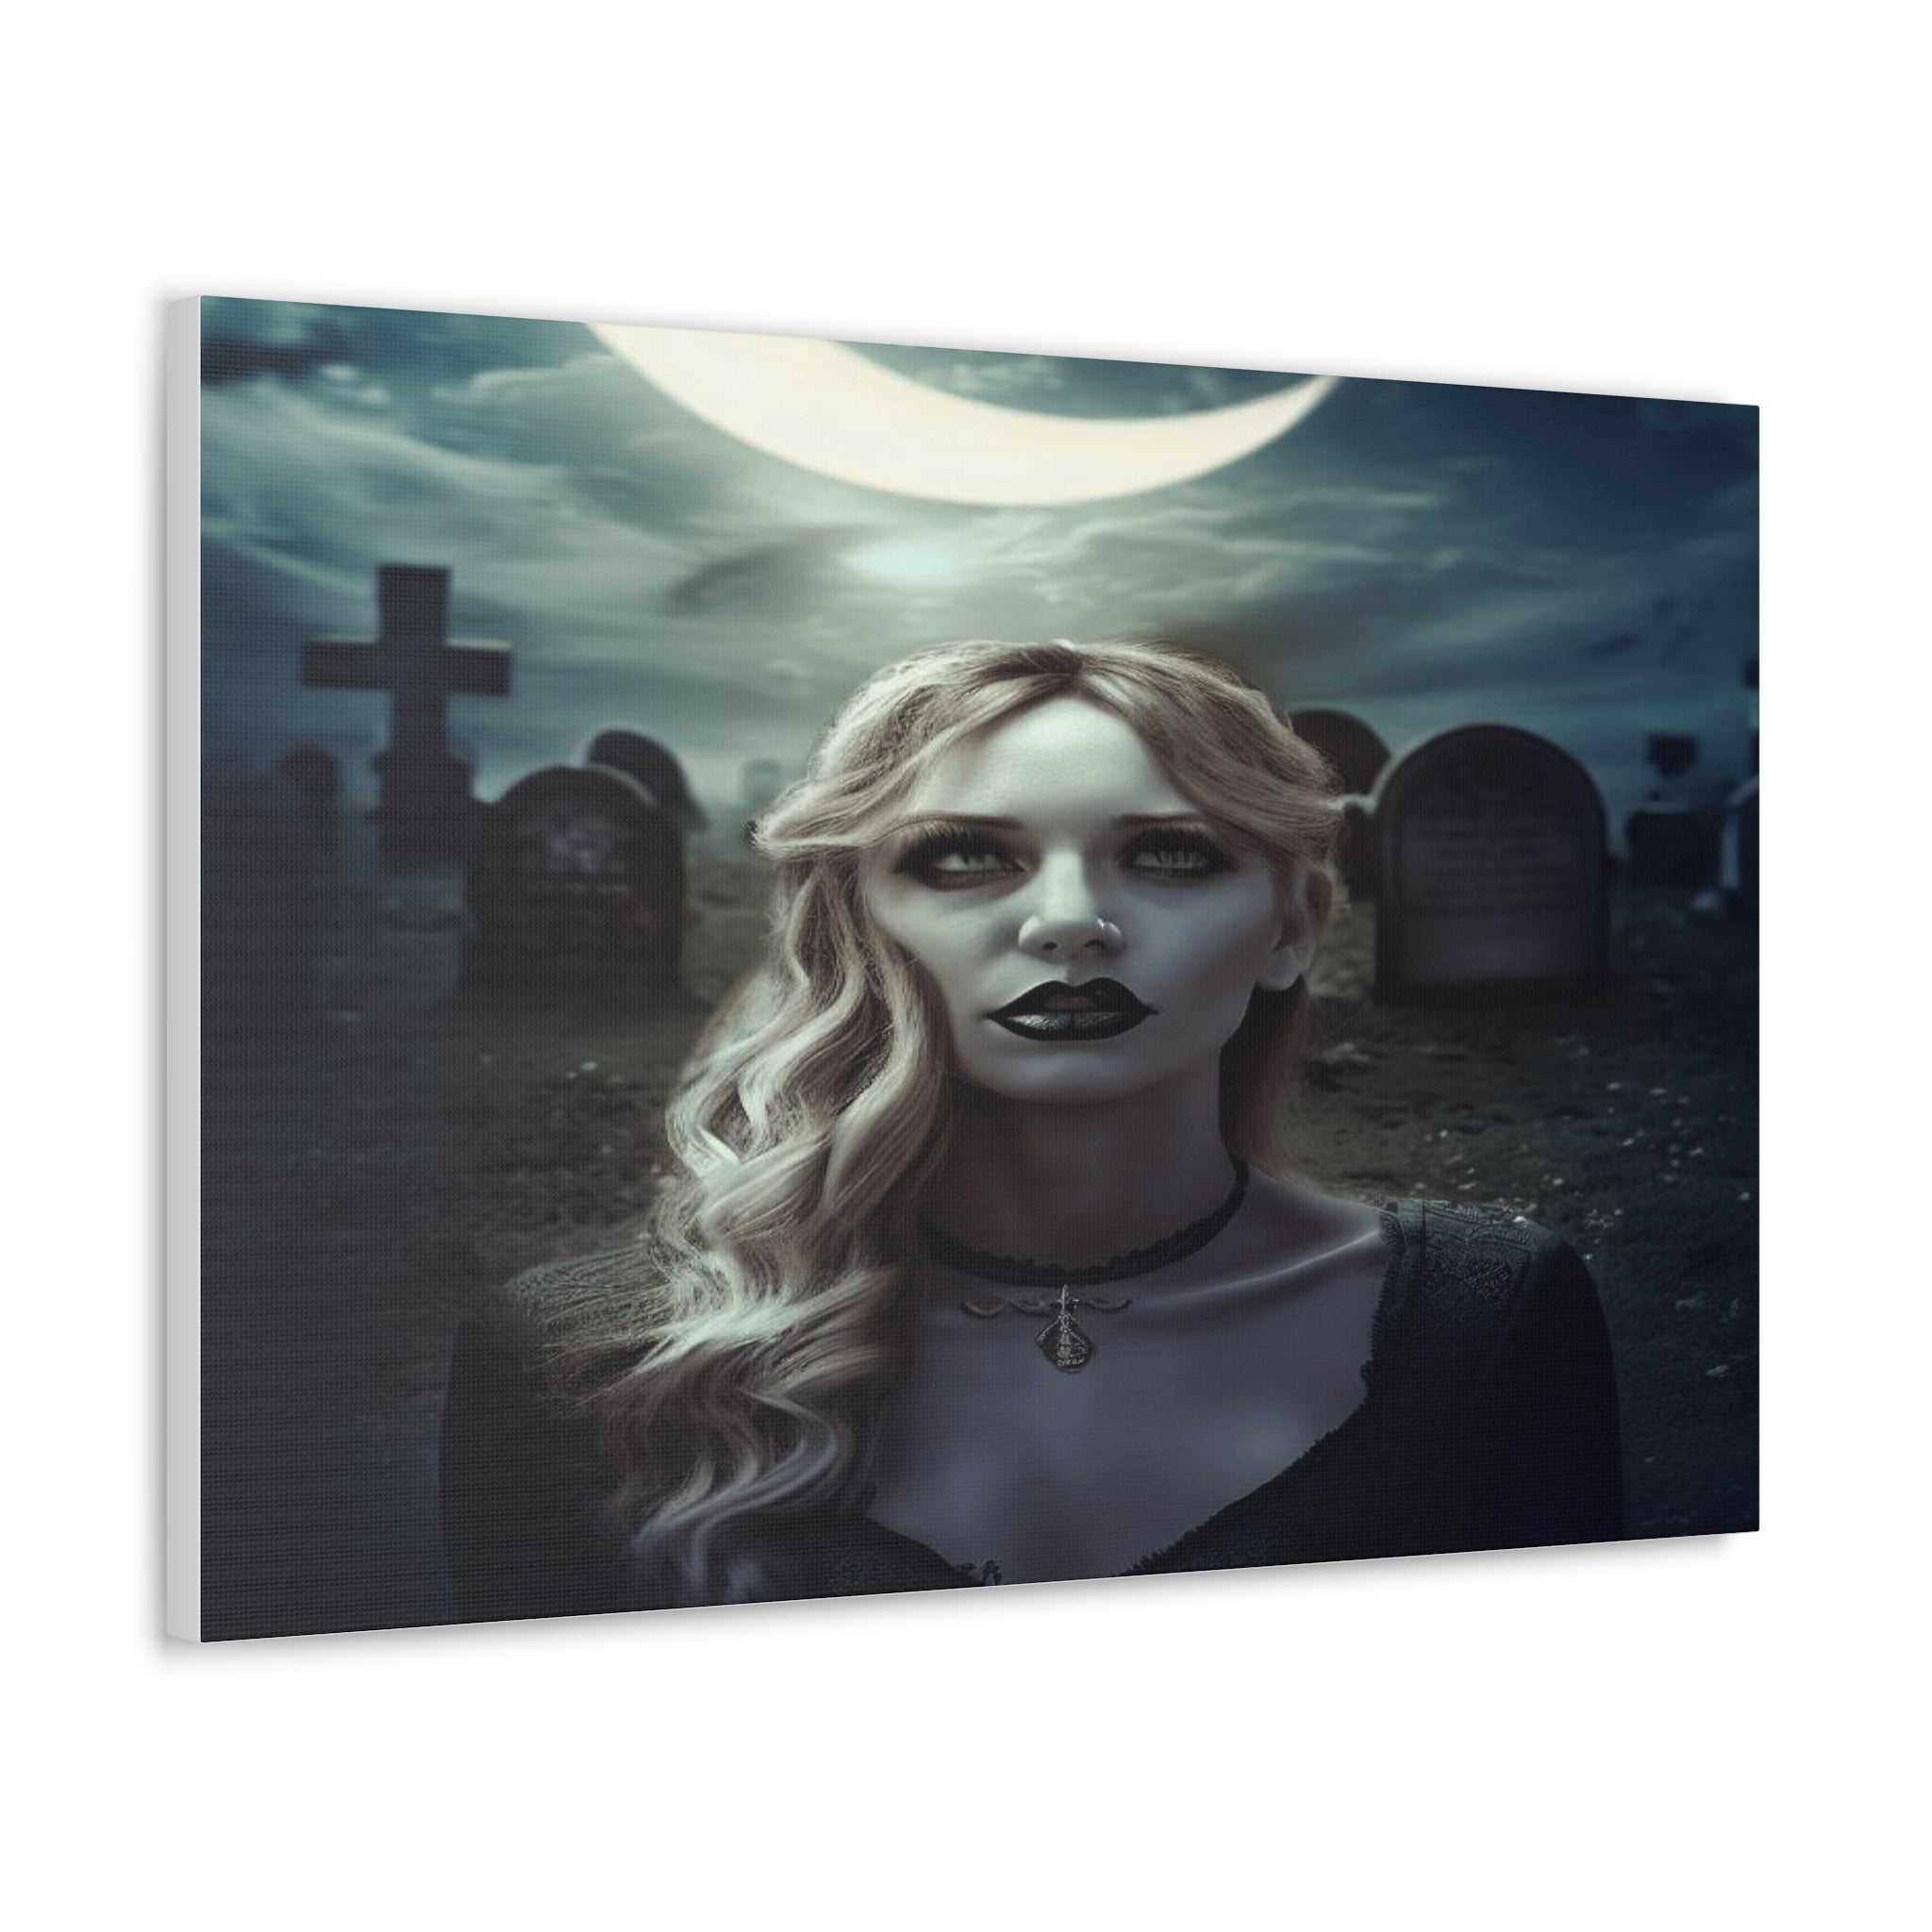 Gothic dark fantasy woman canvas gallery wraps  gift for goth lovers